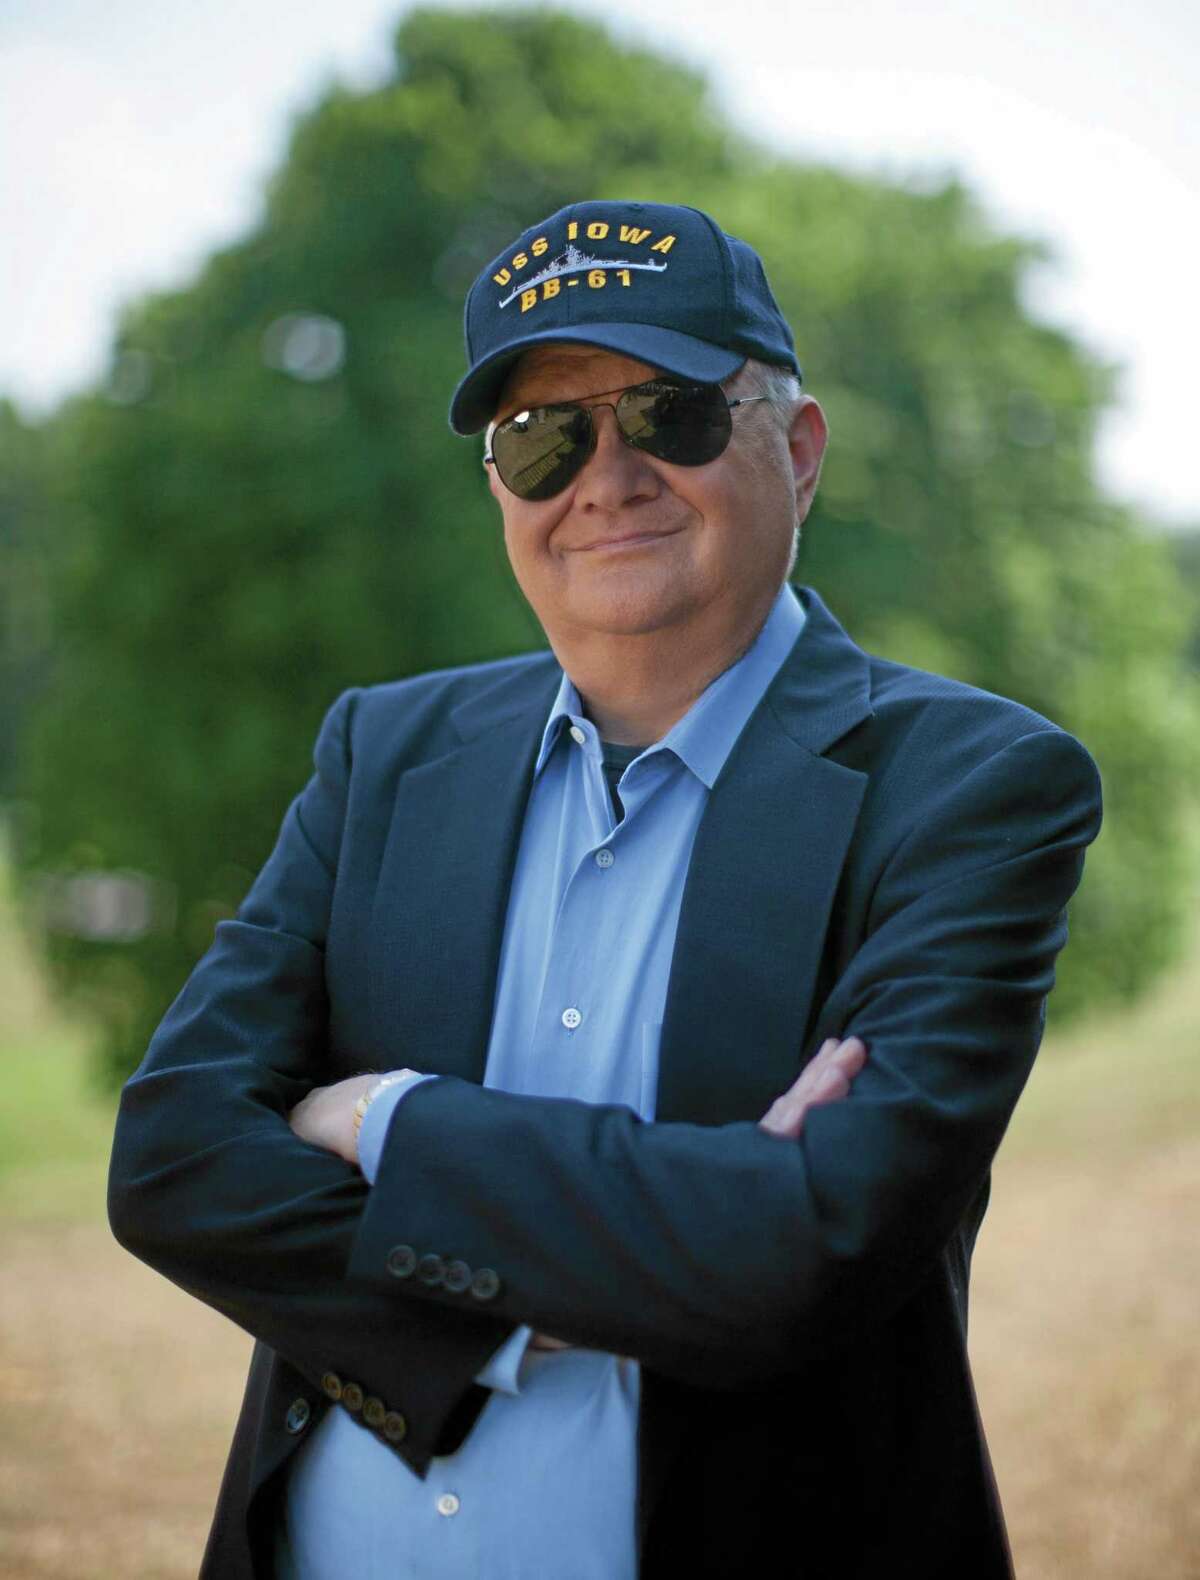 This 2010 image released by G.P. Putnam Sons shows author Tom Clancy in Huntingtown, Md. Clancy, the bestselling author of "The Hunt for Red October" and other wildly successful technological thrillers, has died. He was 66. Penguin Group (USA) said Wednesday that Clancy died Tuesday in Baltimore. The publisher did not disclose a cause of death. (AP Photo/G.P. Putnam Sons, David Burnett)